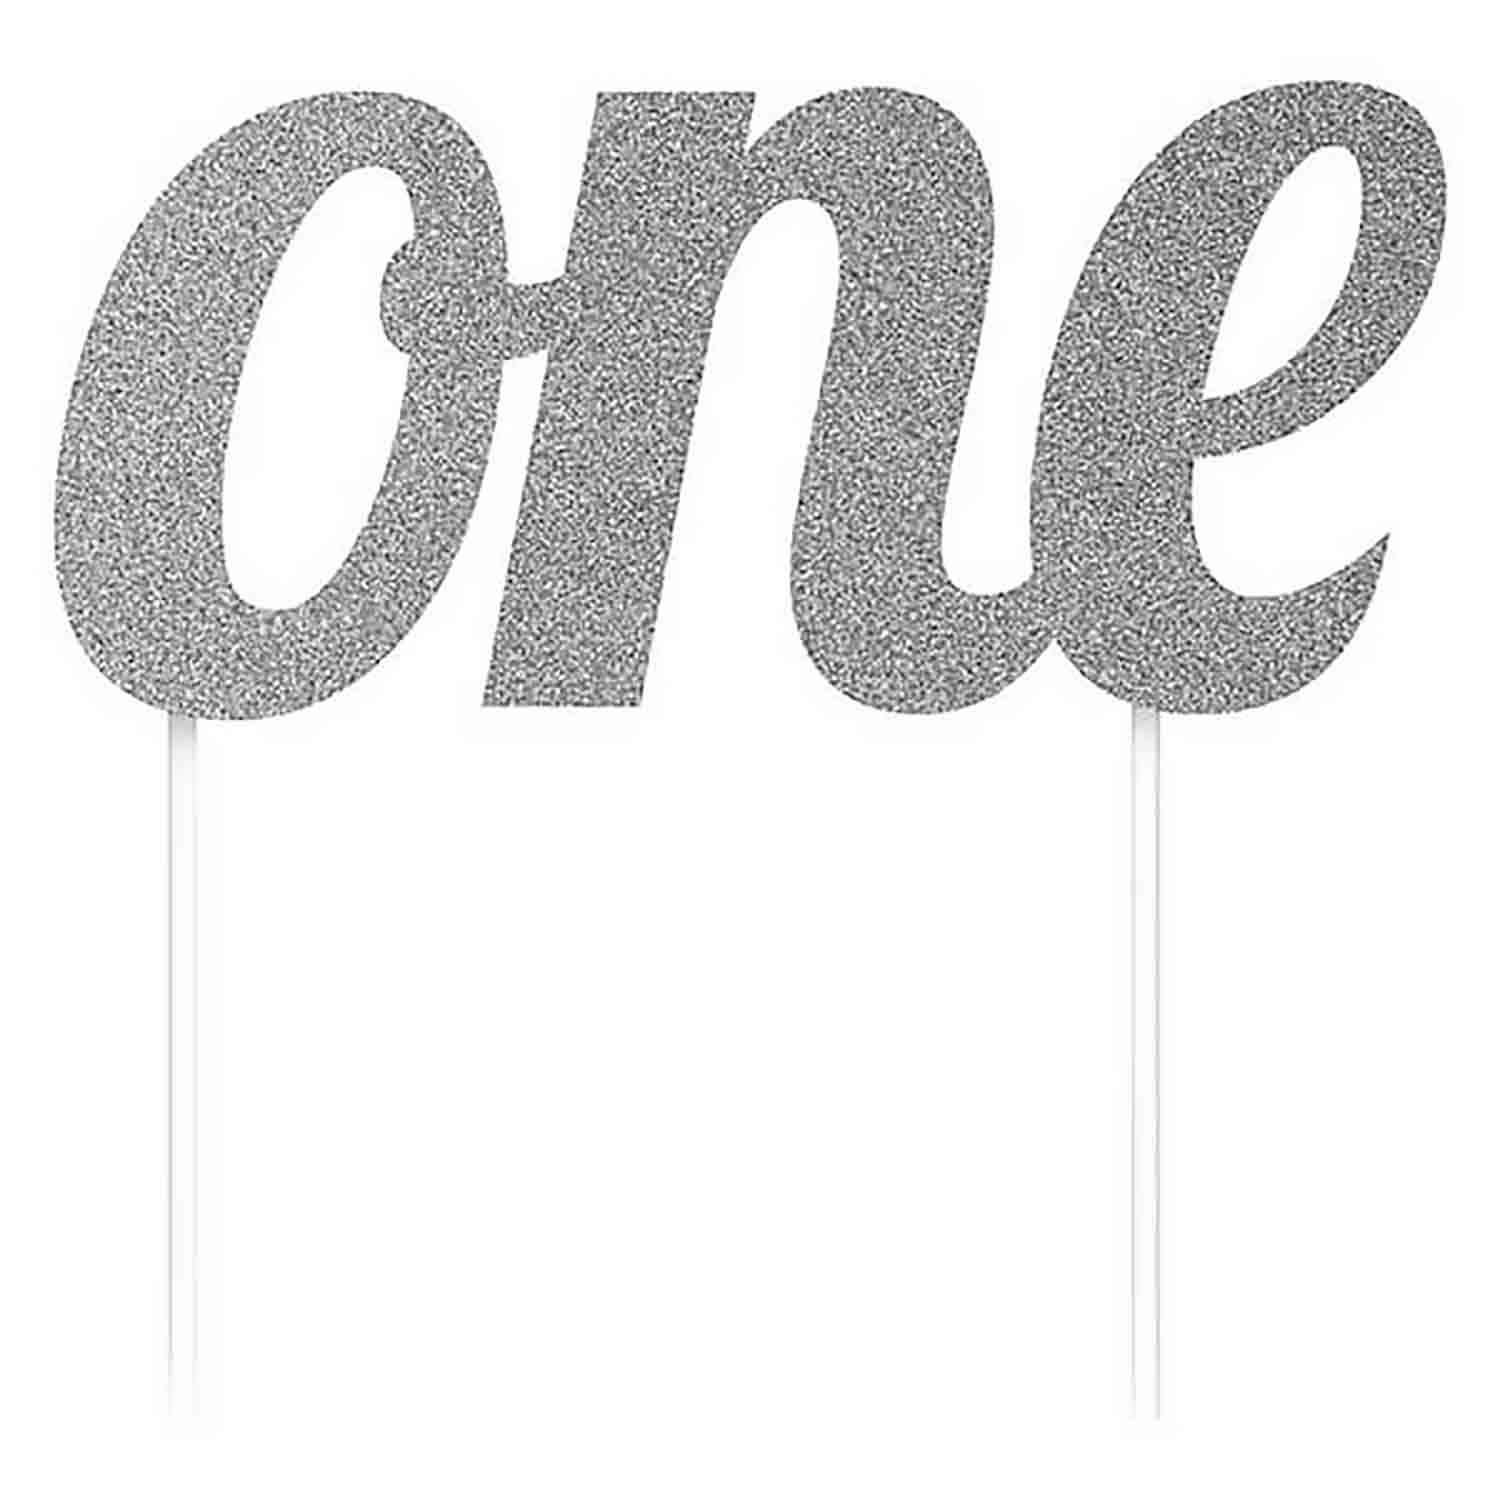 Silver "One" Cake Topper